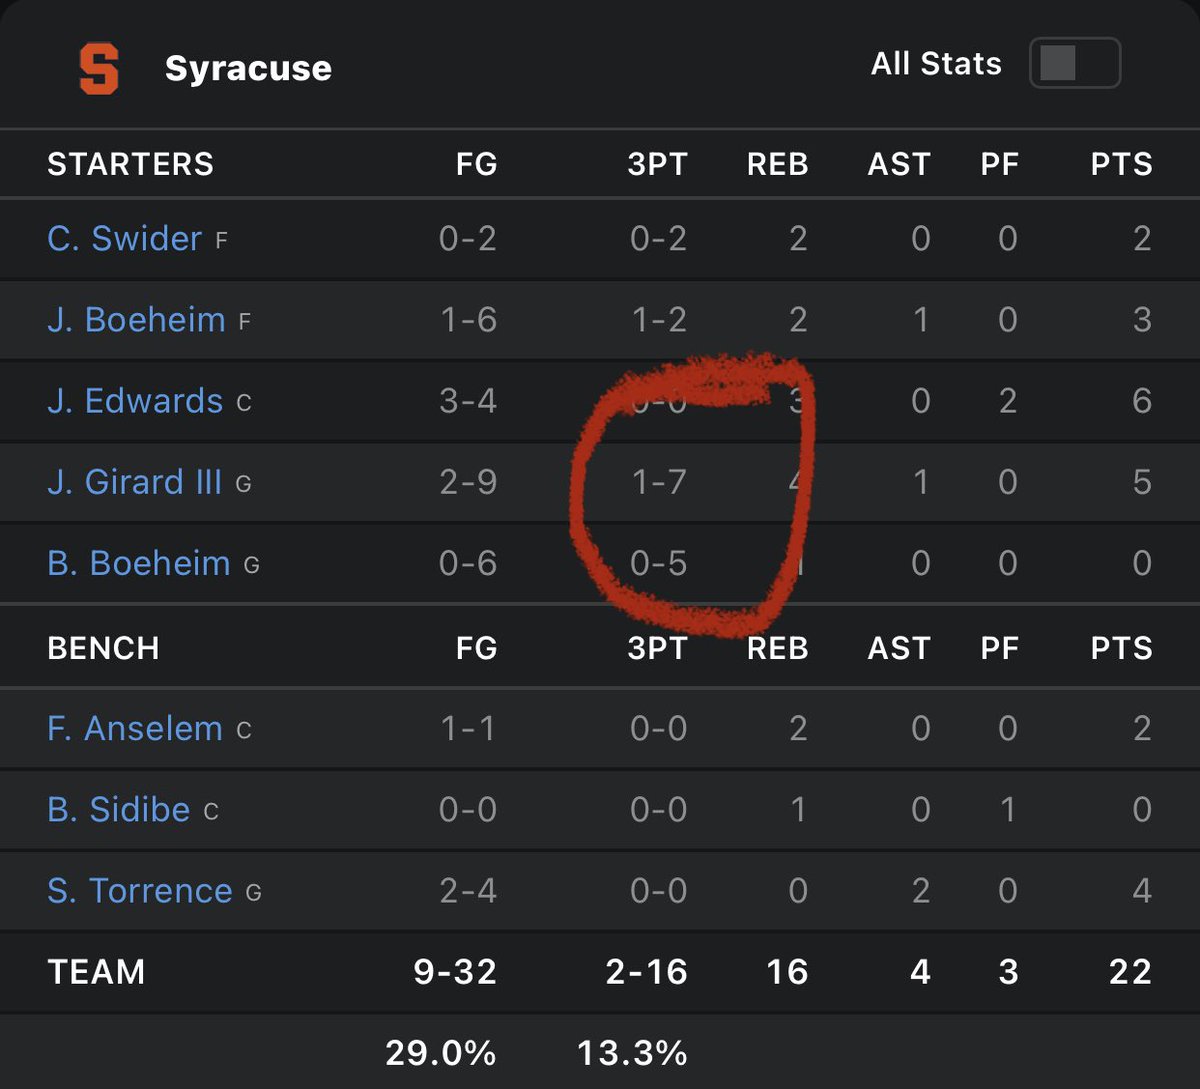 I’m not normally a basketball analyst but I can’t help but wonder if this is a bad sign for Syracuse’s upset hopes… https://t.co/g66QfukC9z